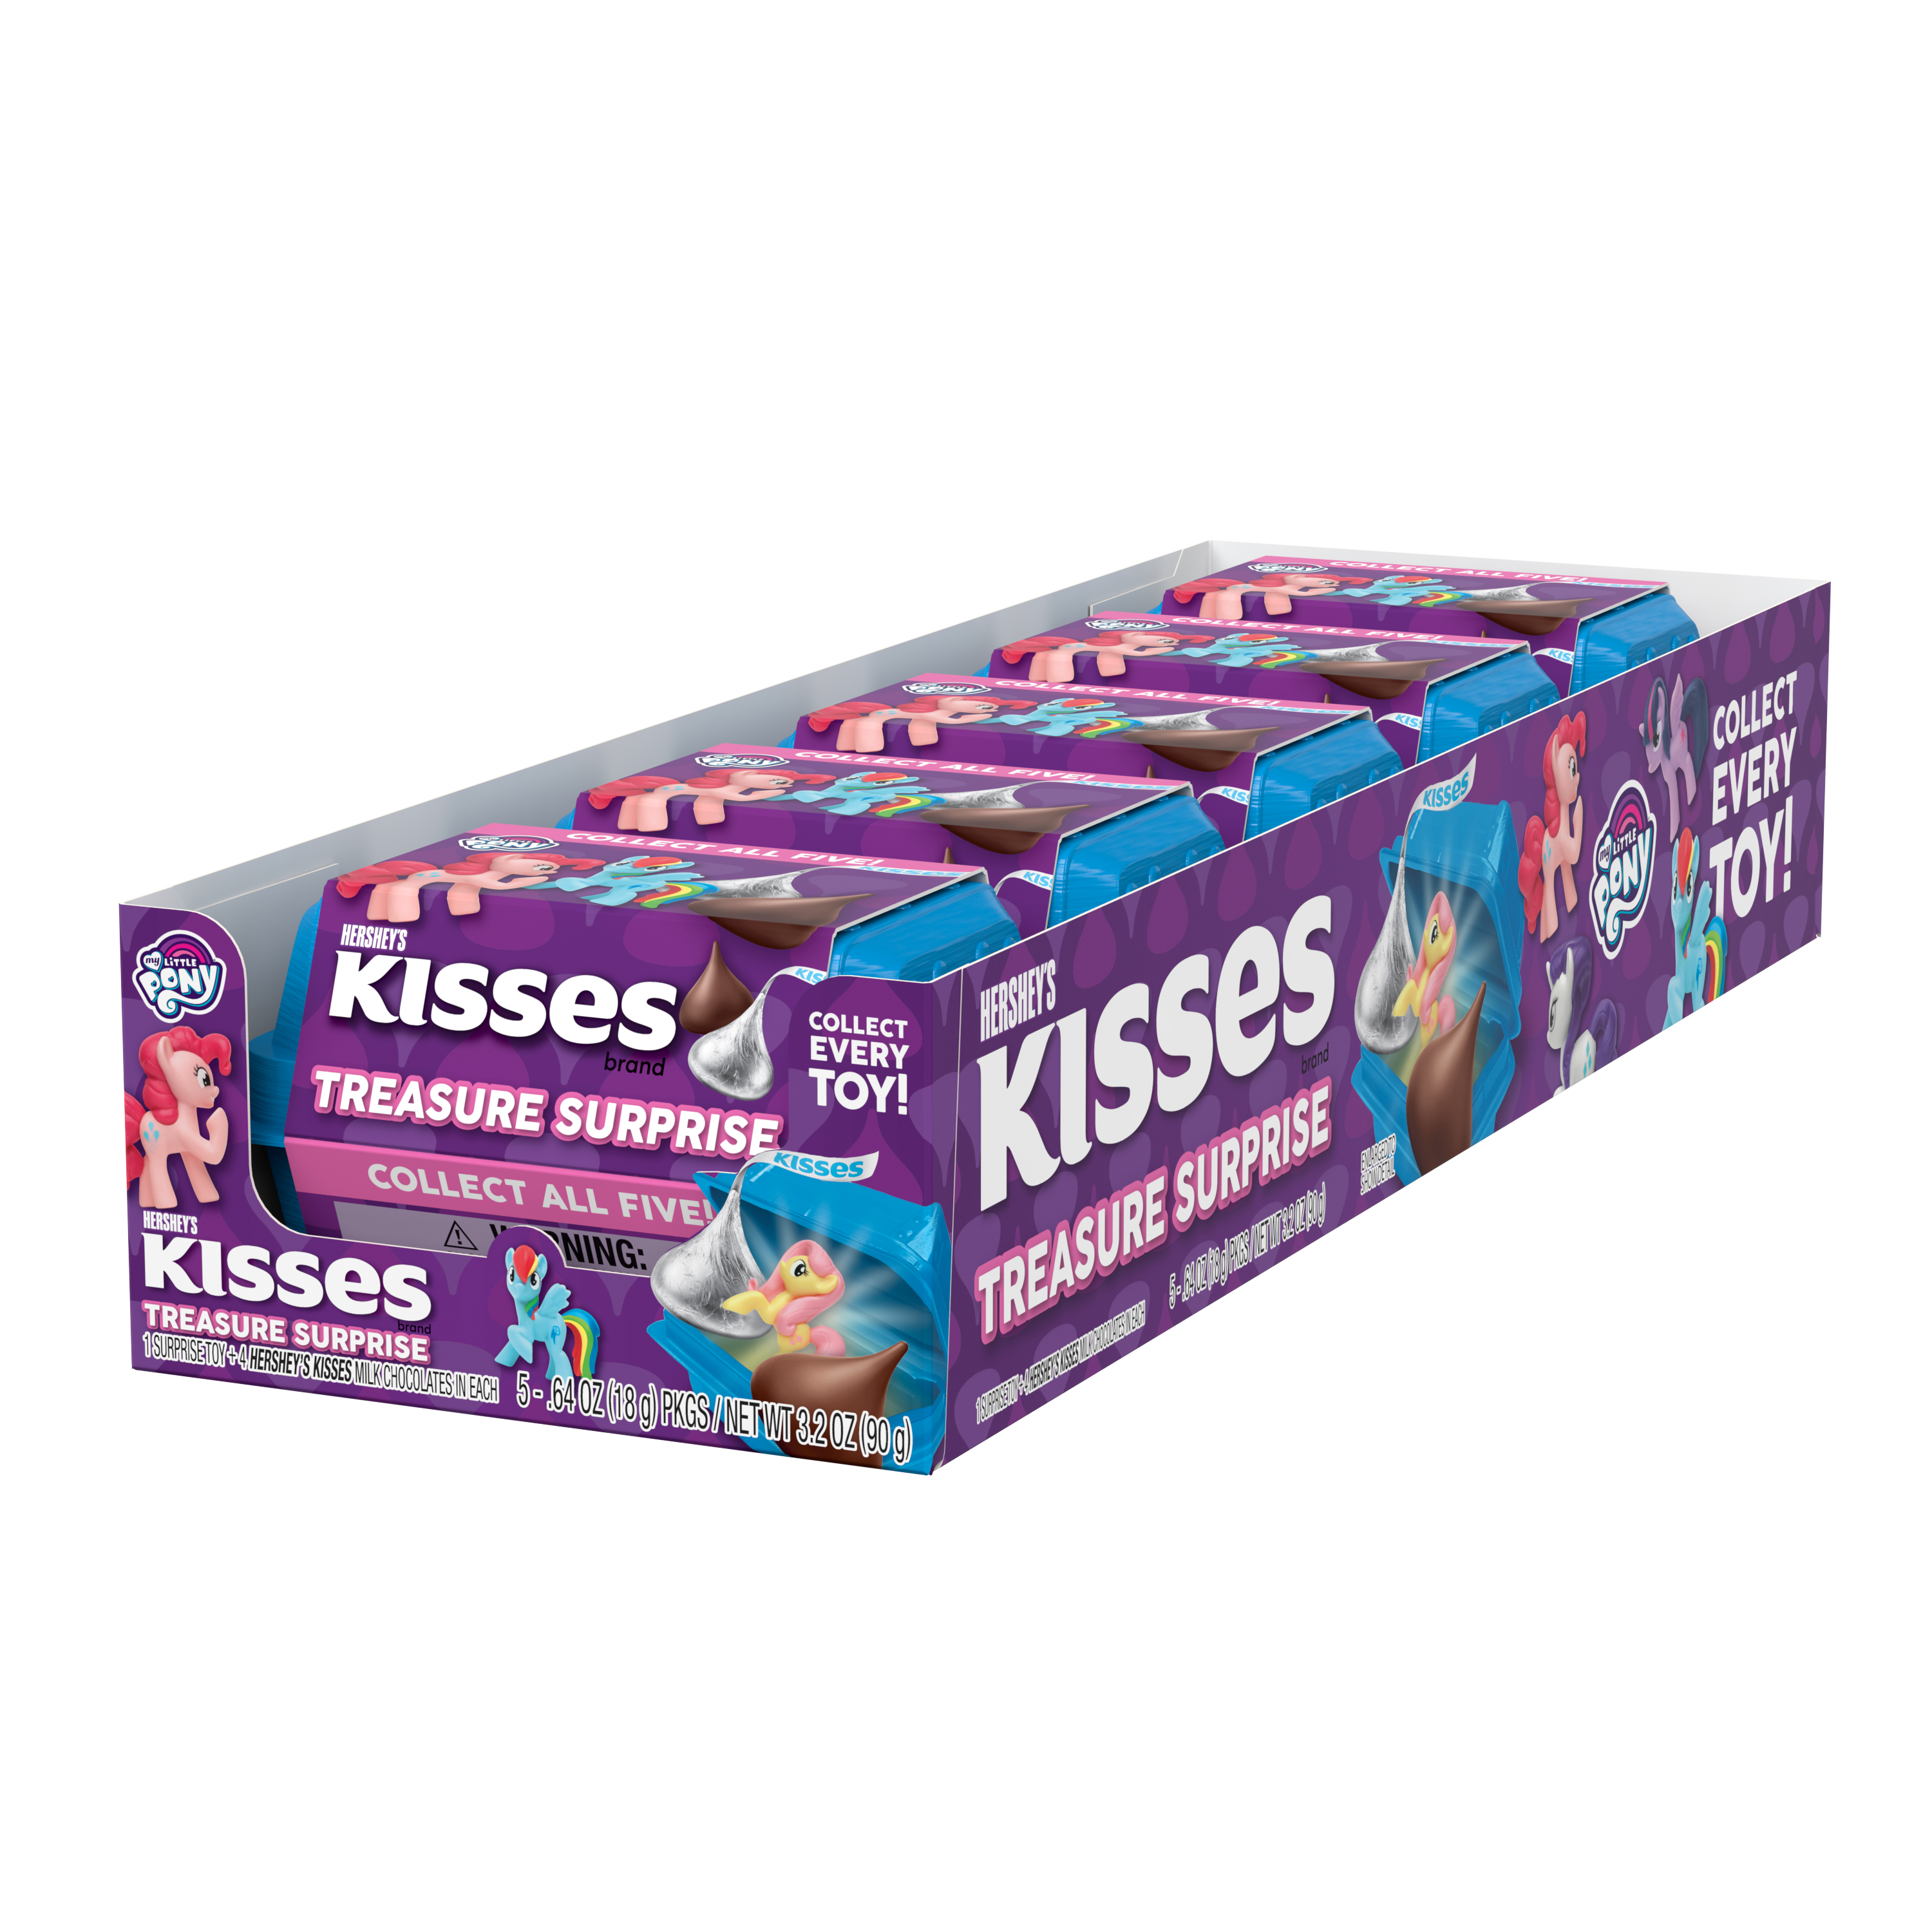 HERSHEY'S KISSES My Little Pony Milk Chocolate Treasure Surprise, 3.2 oz box, 5 pack - Right Side of Package